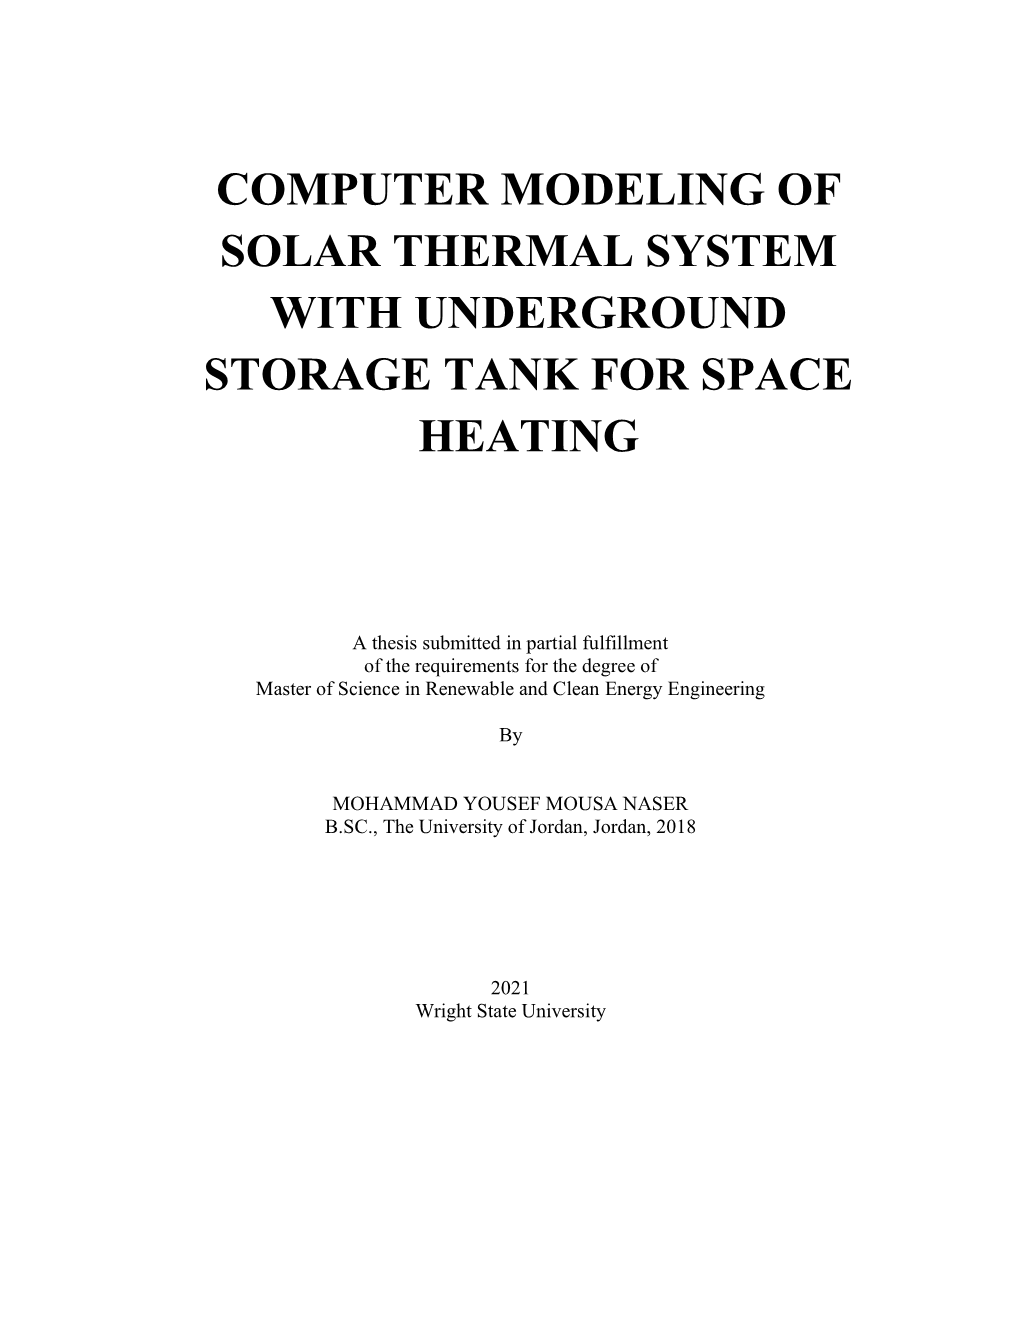 Computer Modeling of Solar Thermal System with Underground Storage Tank for Space Heating